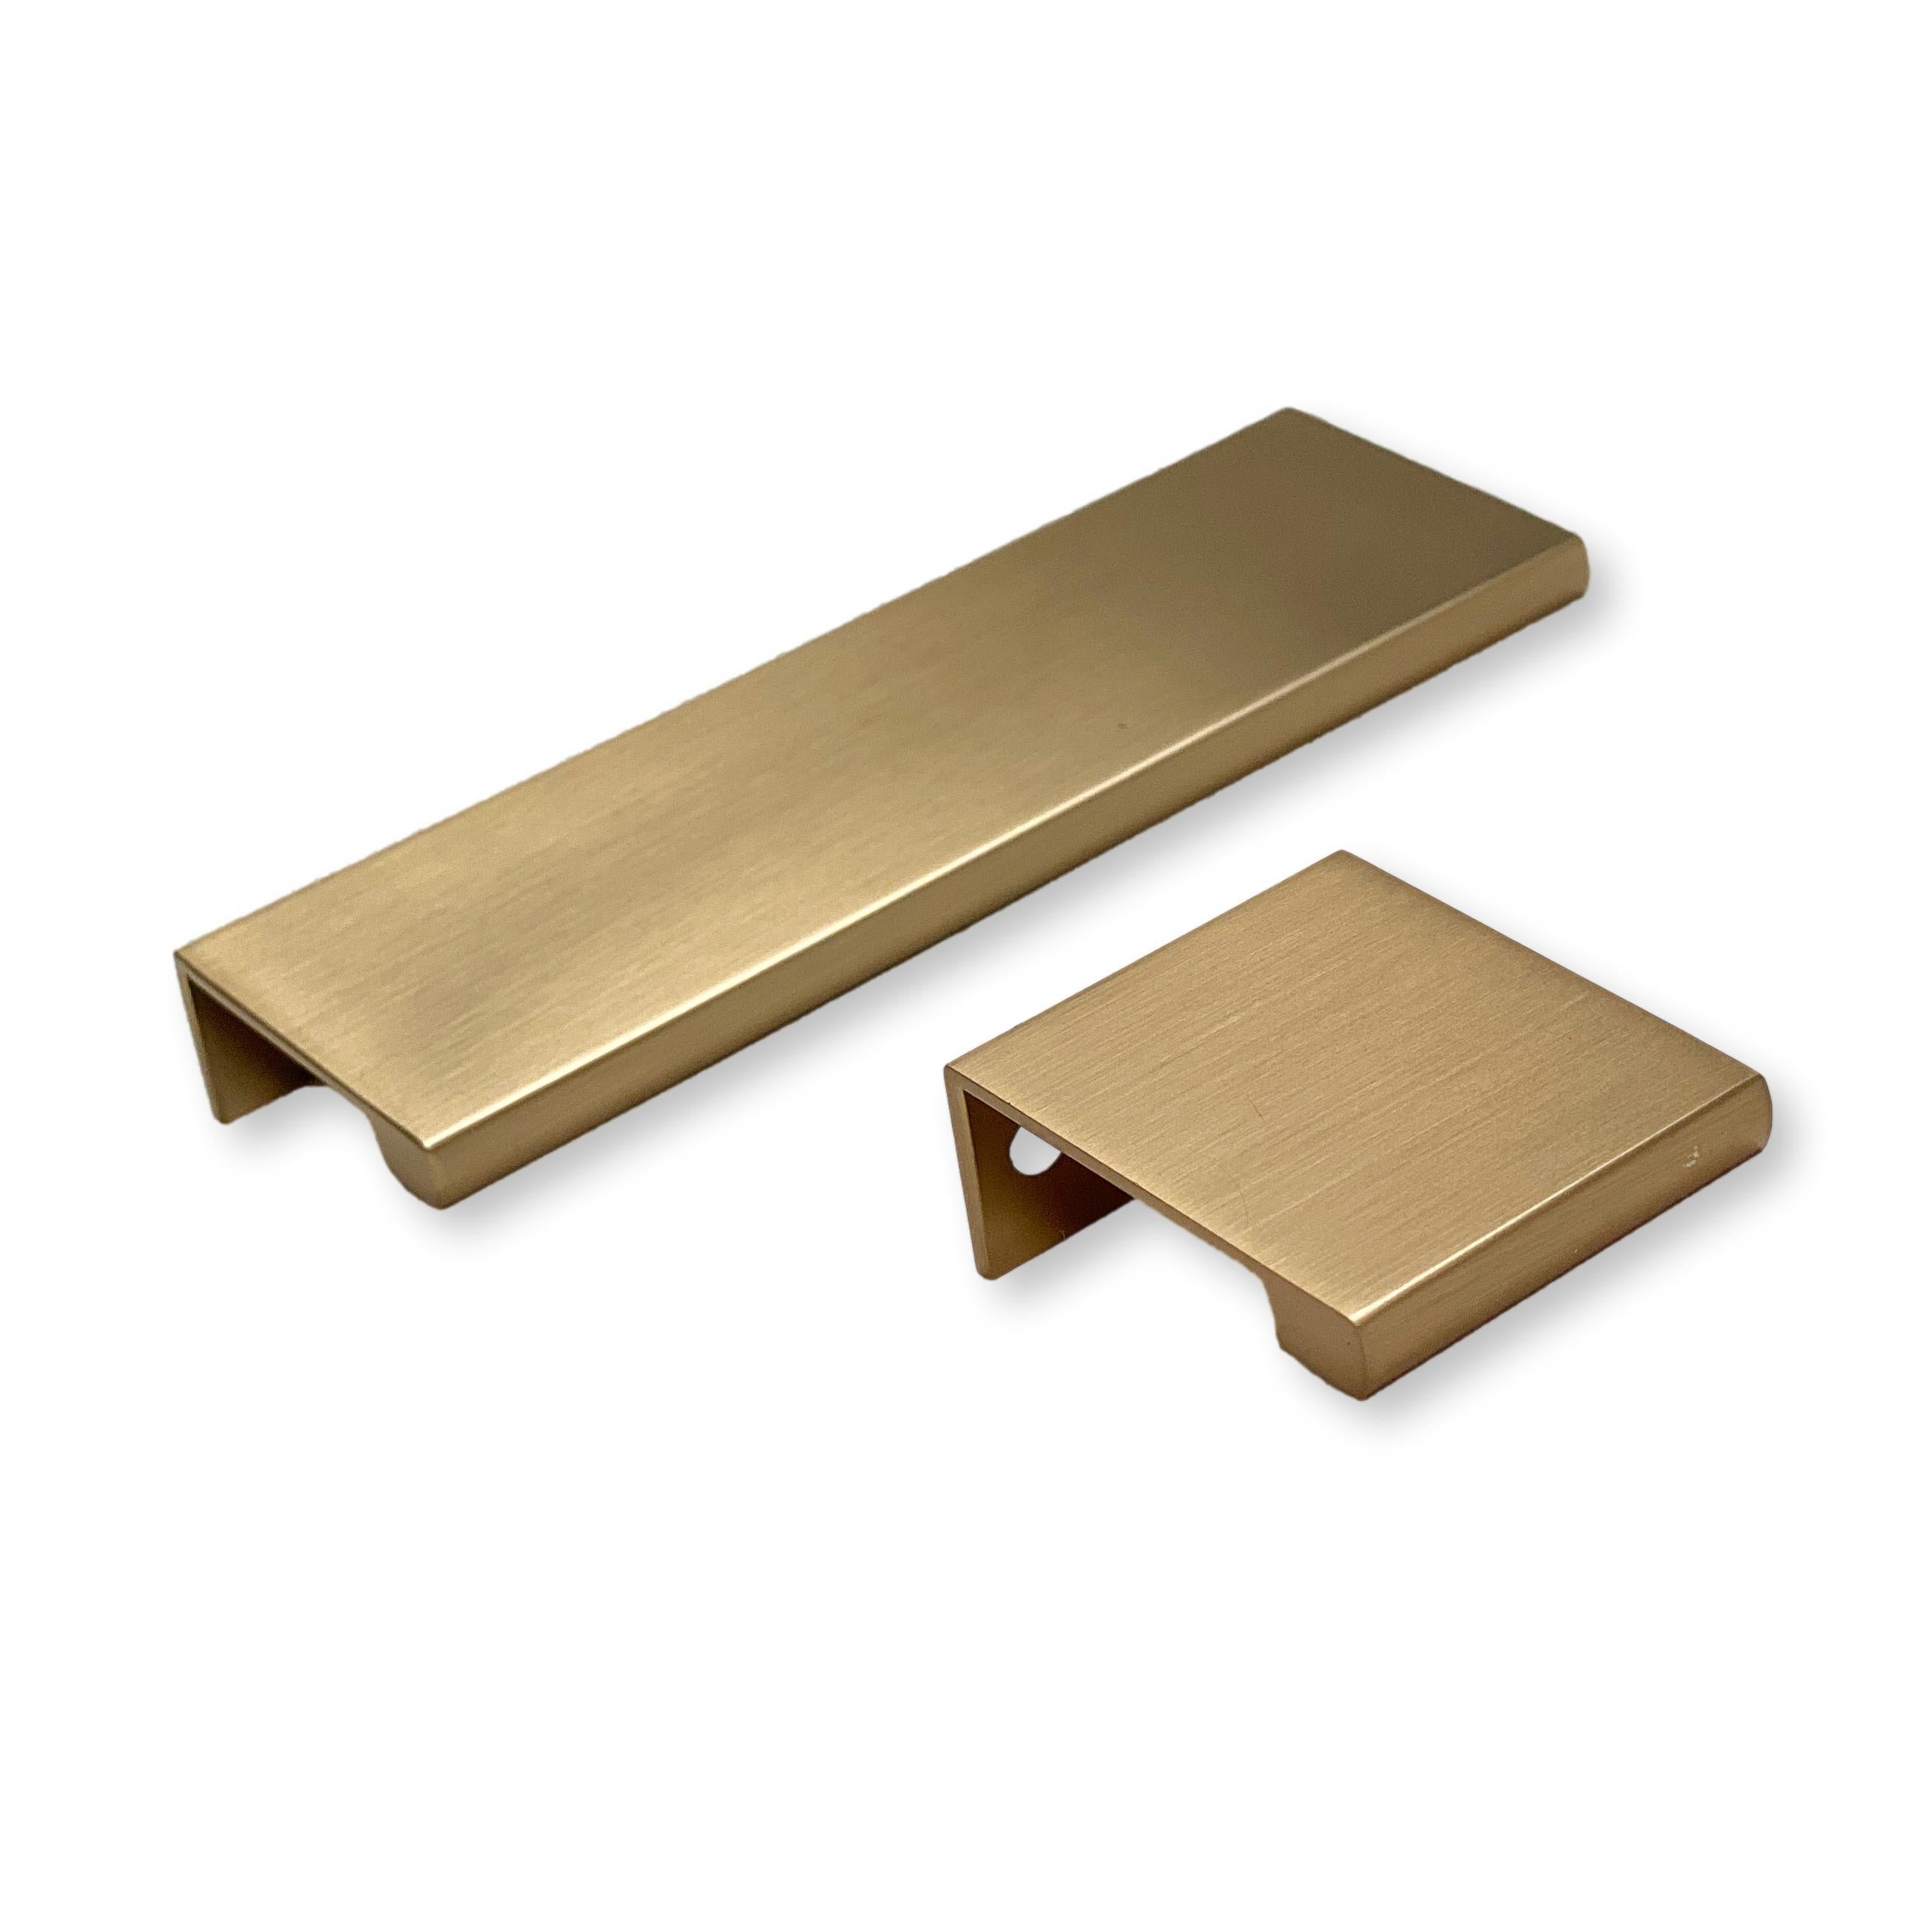 4621 Edge Pull - Lifetime (PVD) Polished Brass